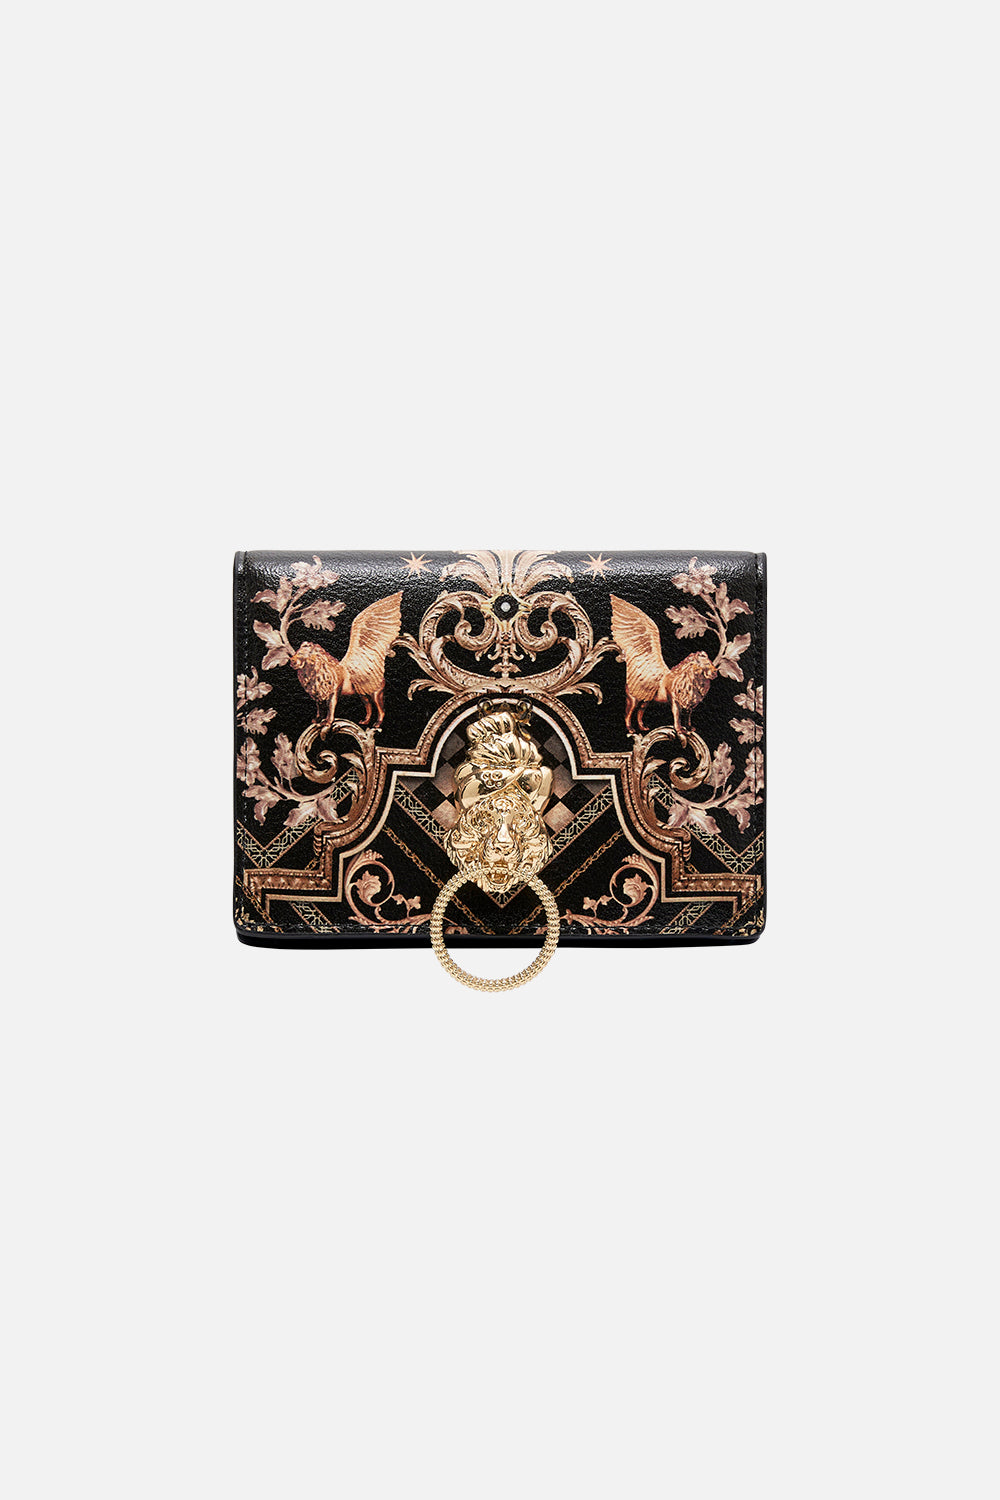 Product view of CAMILLA black and gold printed wallet in Duomo Dynasty 